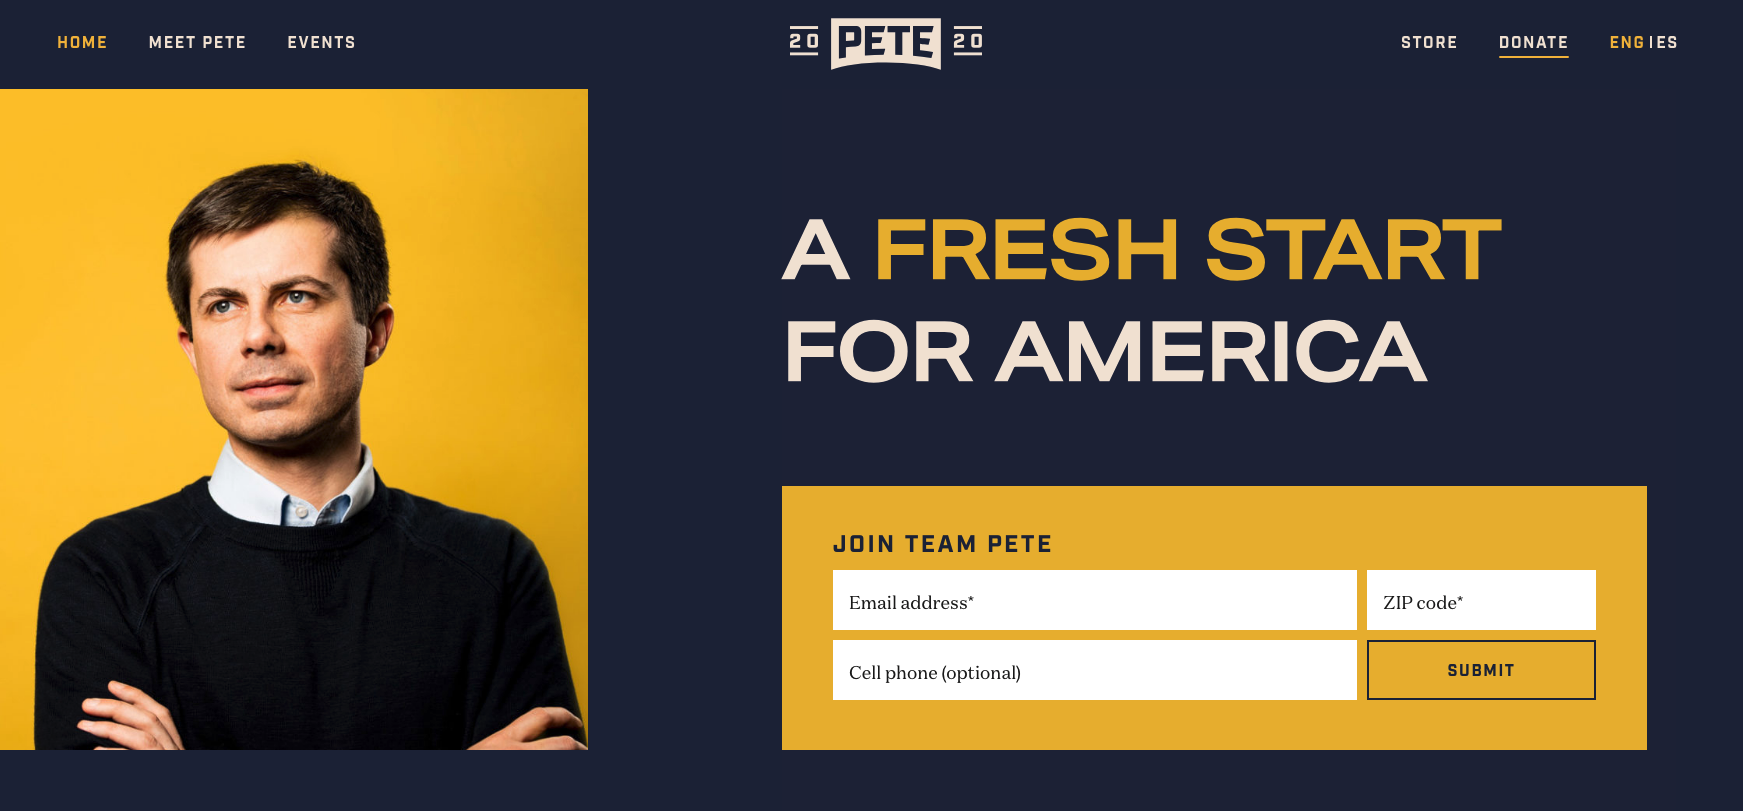 Best and Worst 2020 Democratic Presidential Candidate Websites